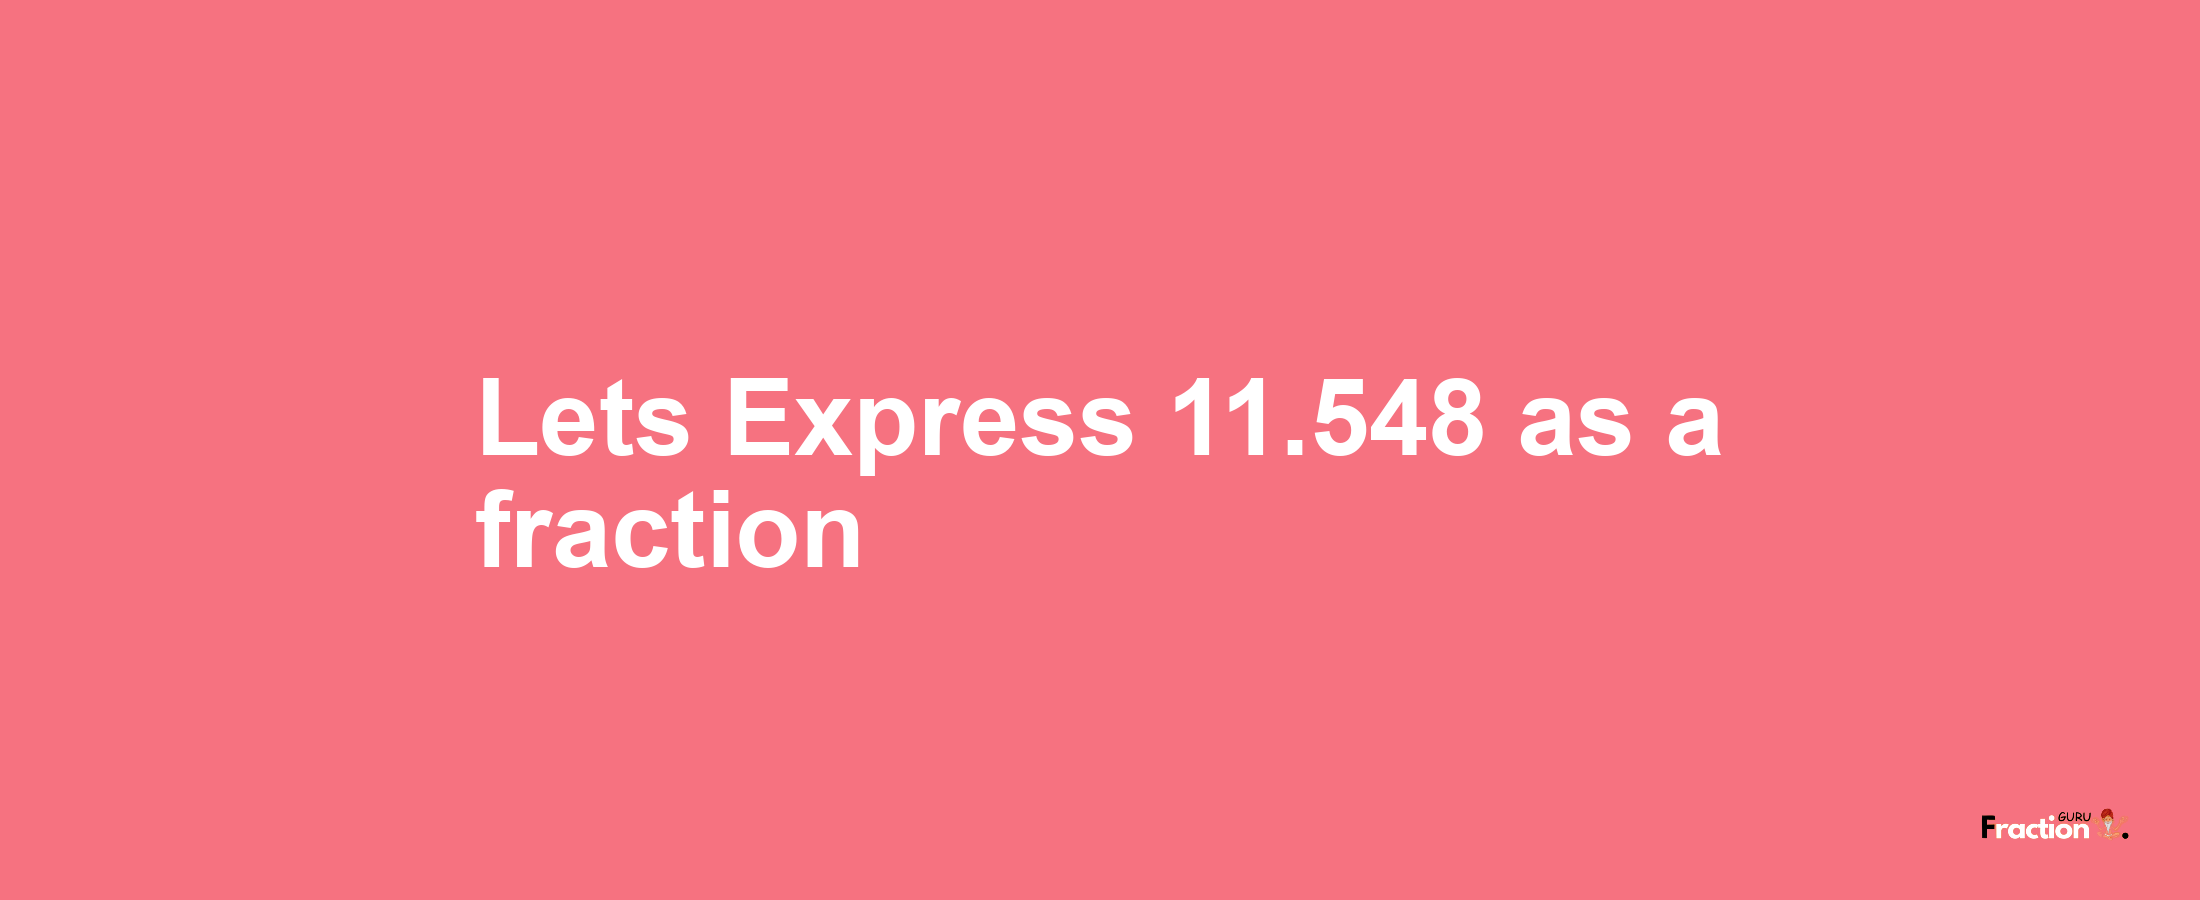 Lets Express 11.548 as afraction